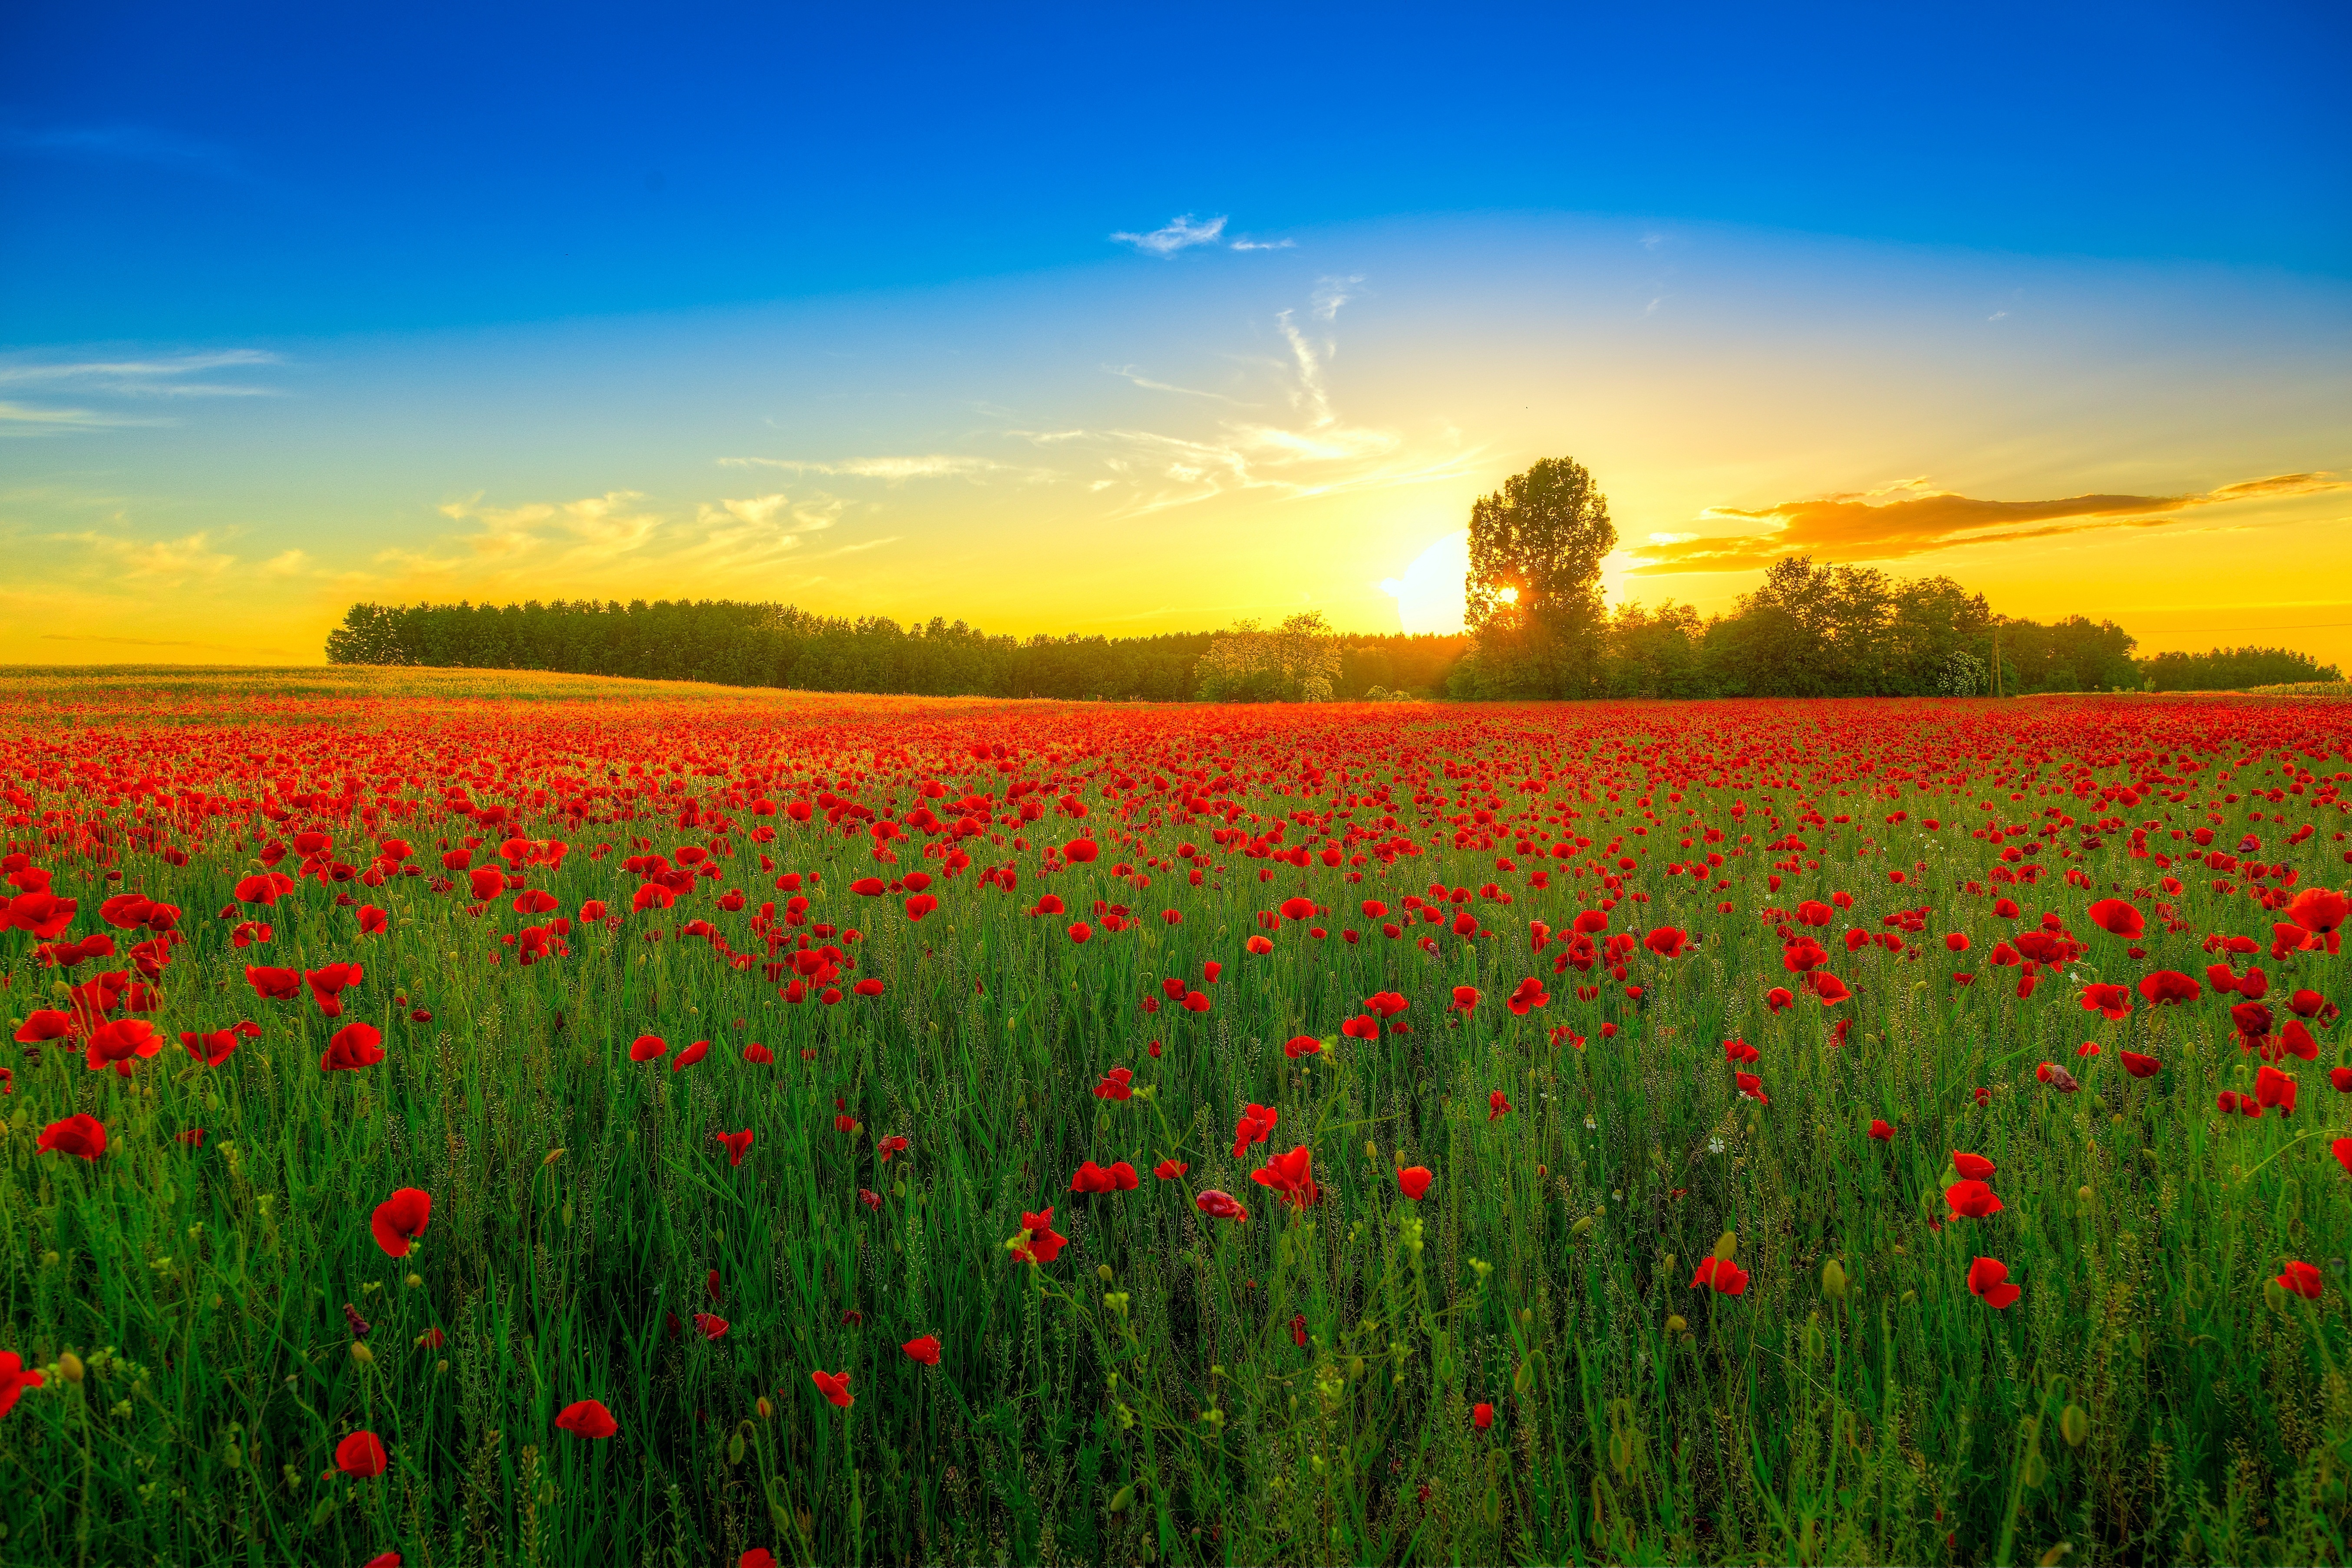 109528 download wallpaper nature, sunset, poppies, clouds, bloom, flowering, field screensavers and pictures for free